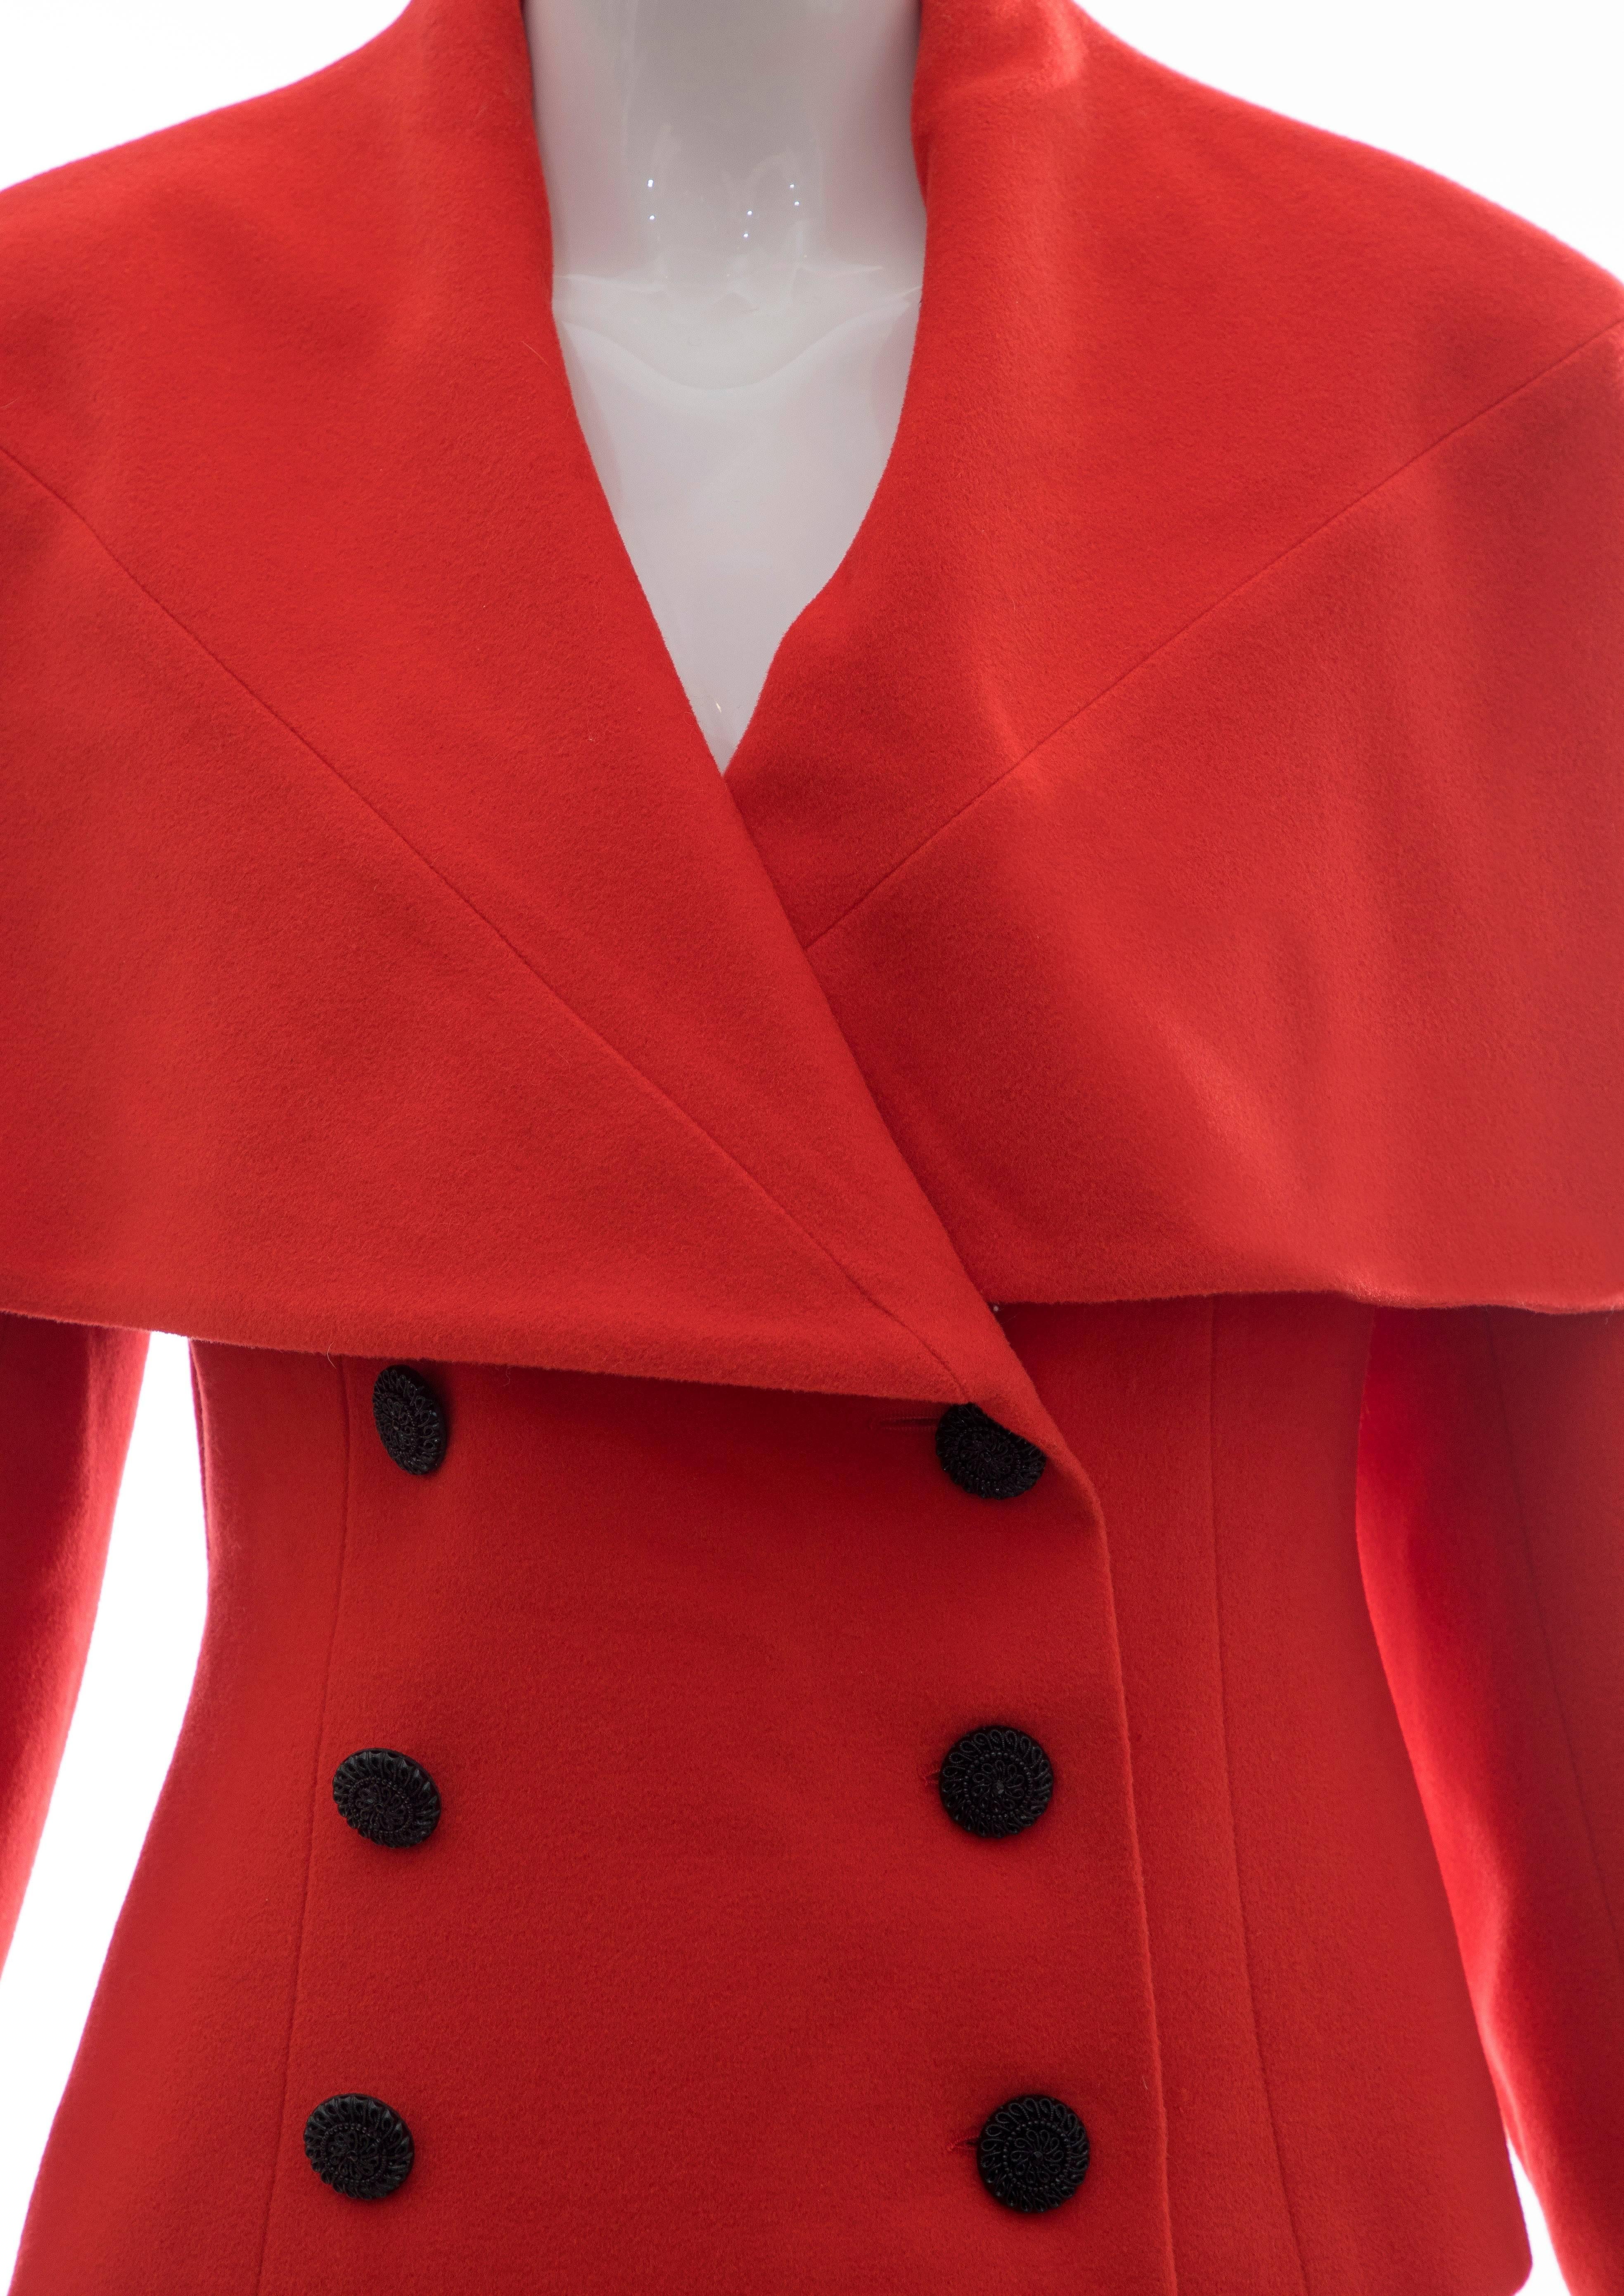 Red Karl Lagerfeld For Chloe Paprika Wool Shawl Collar Jacket, Circa 1980's For Sale